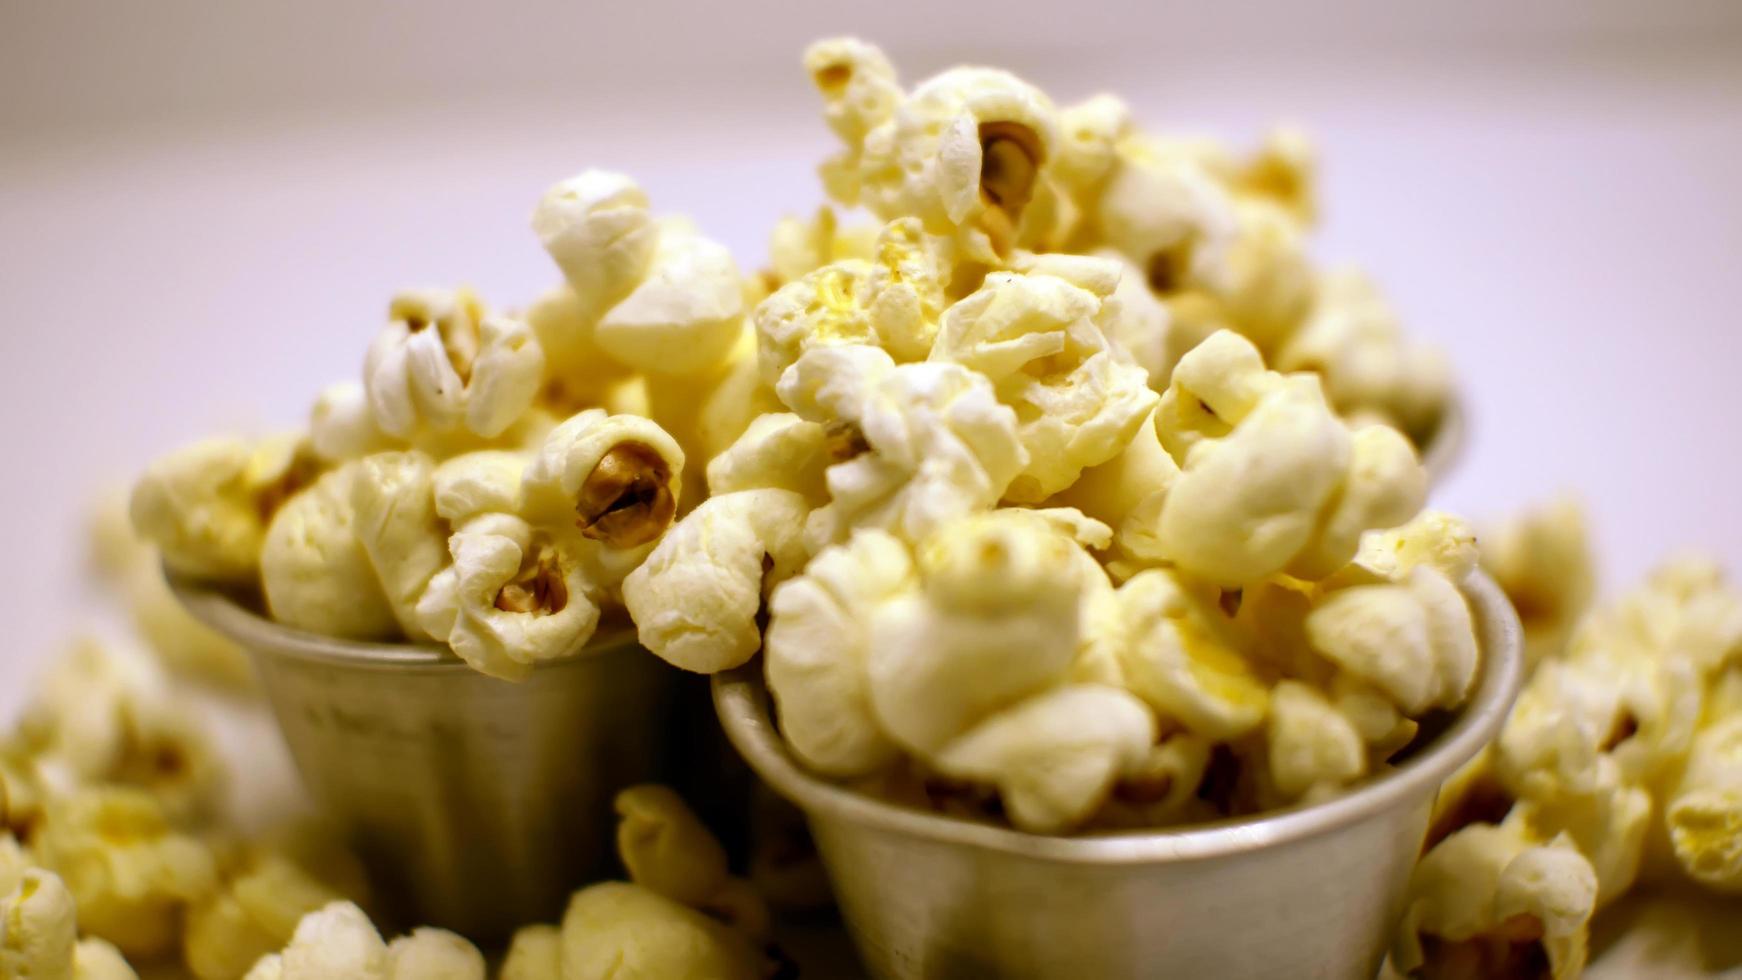 close-up of popcorn kernels on a white background in jpg format photo